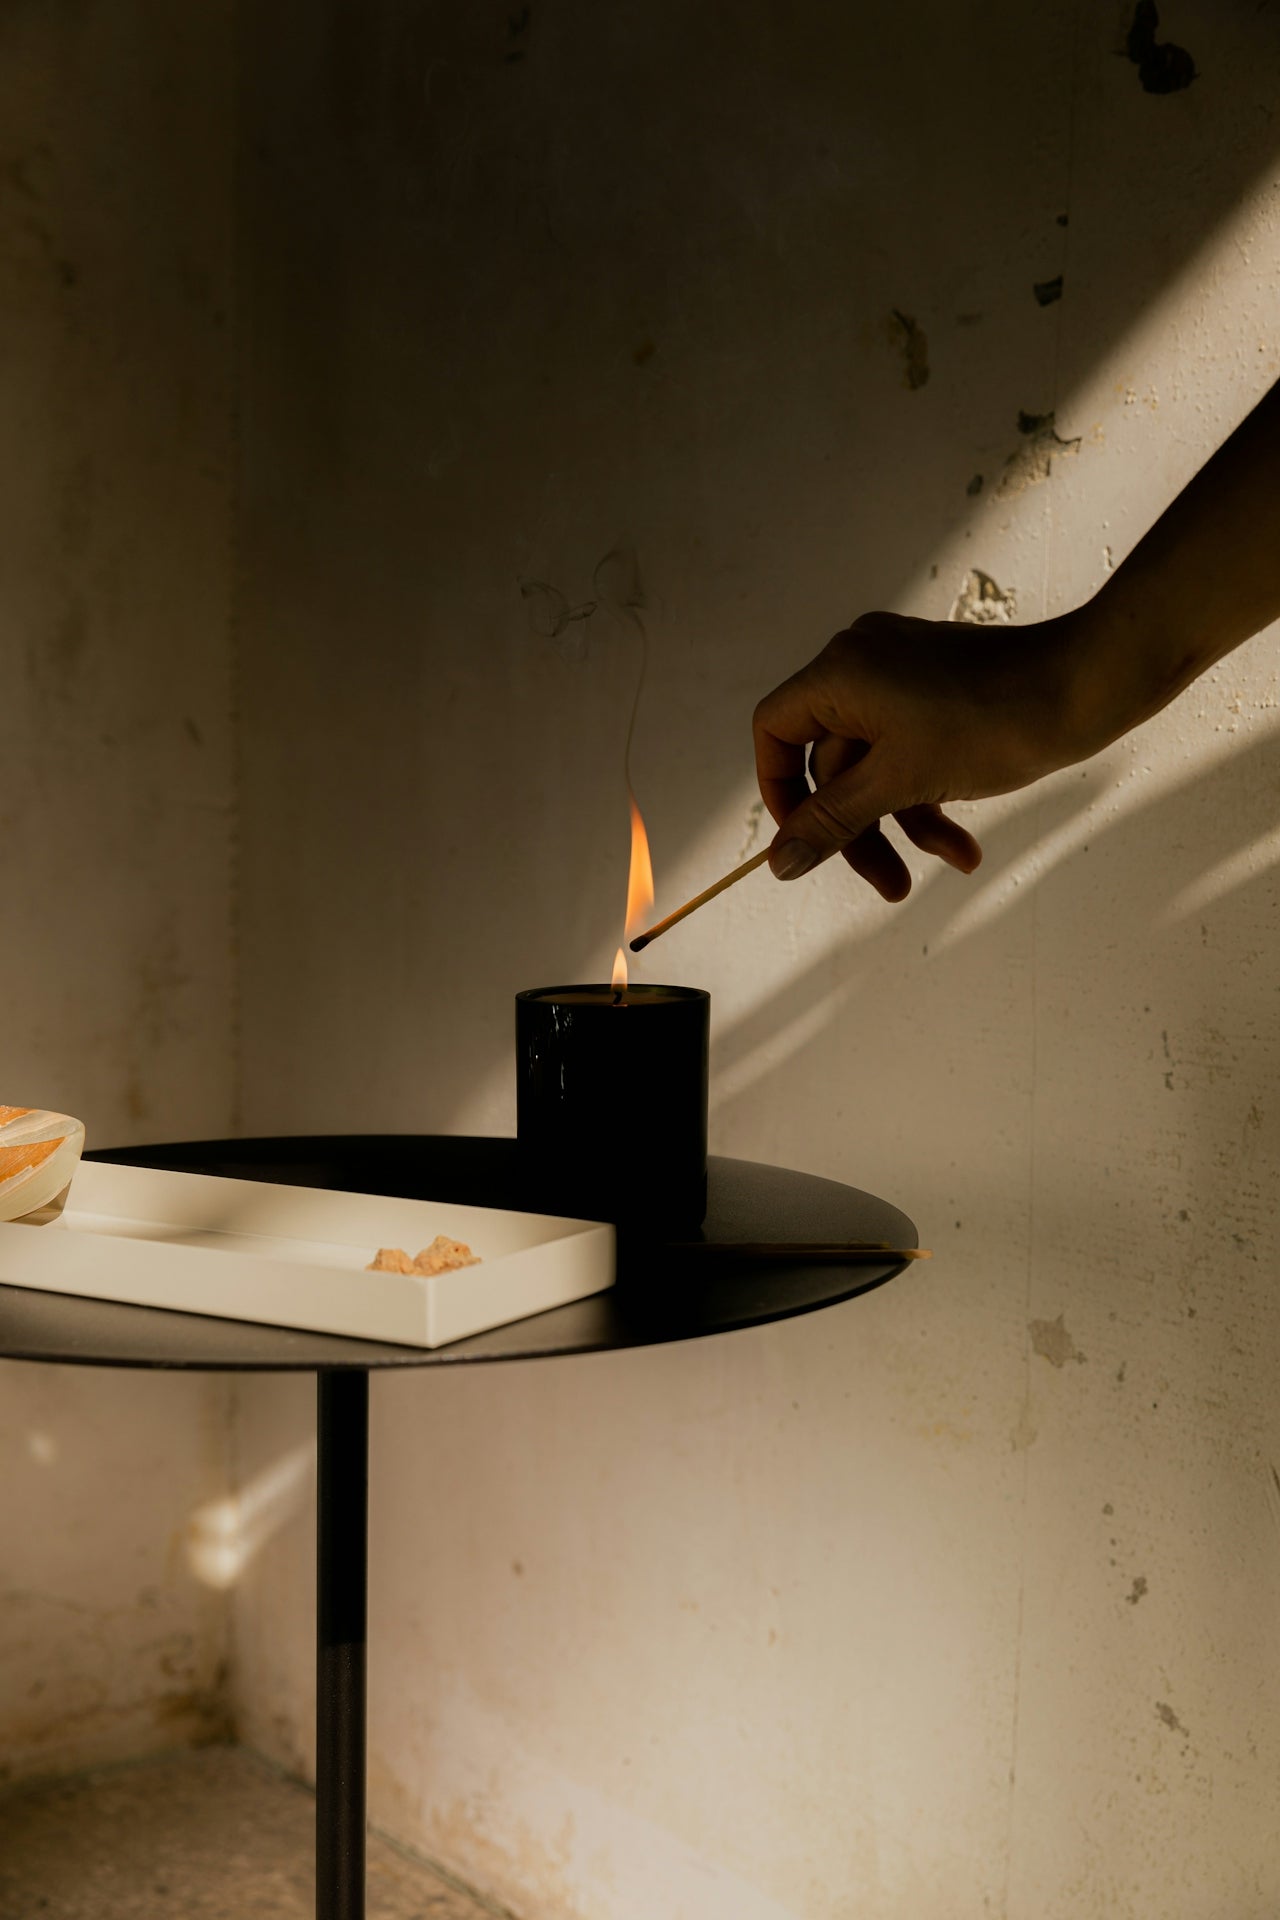 A person lighting a candle in a sunlight room.